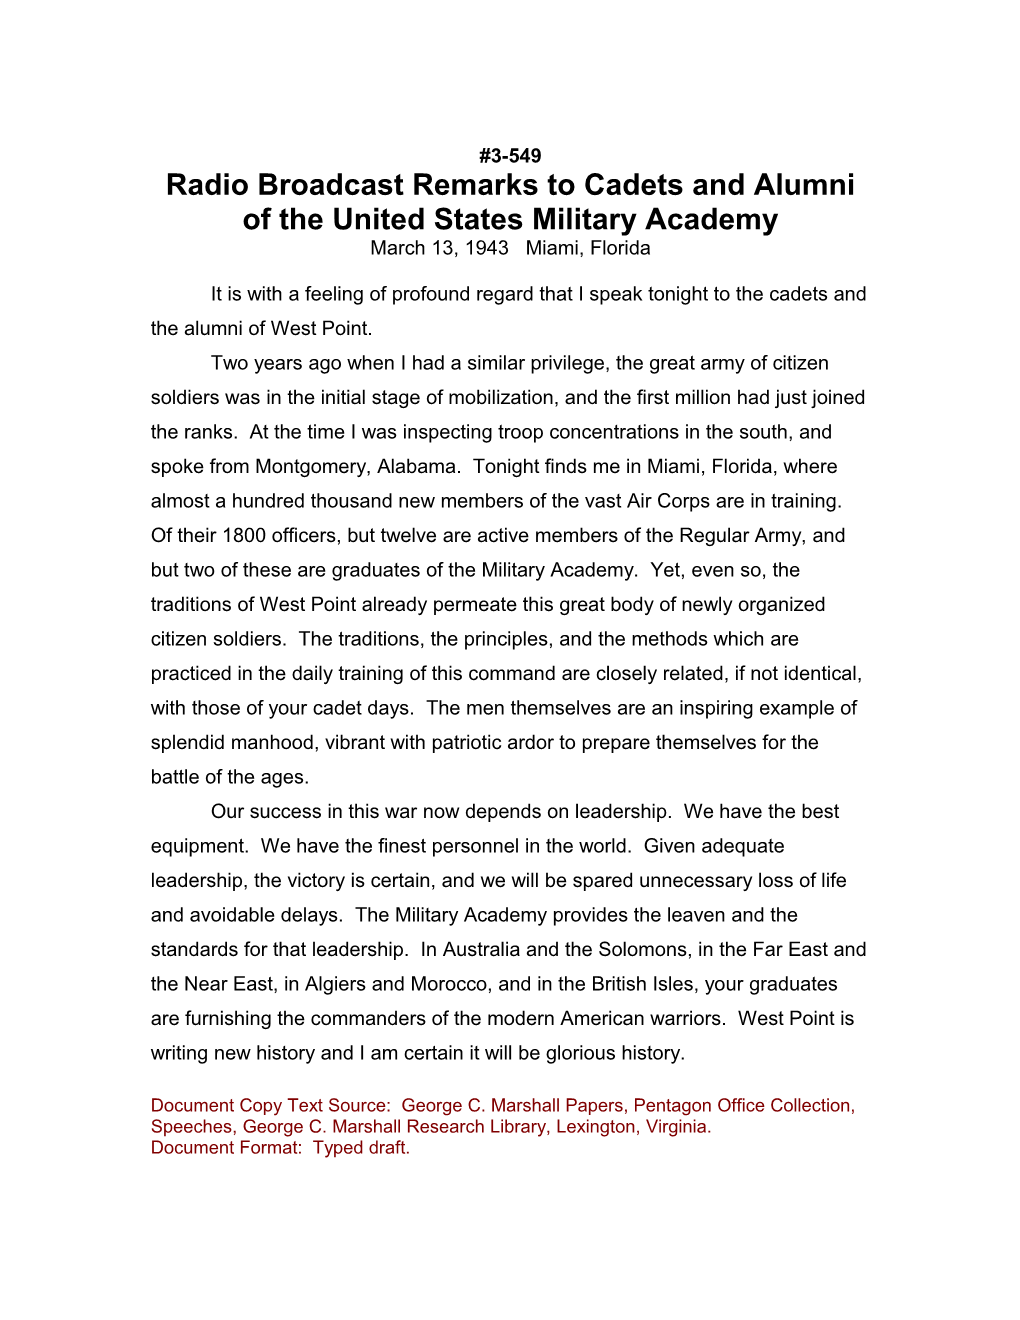 Radio Broadcast Remarks to Cadets and Alumni of the United States Military Academy